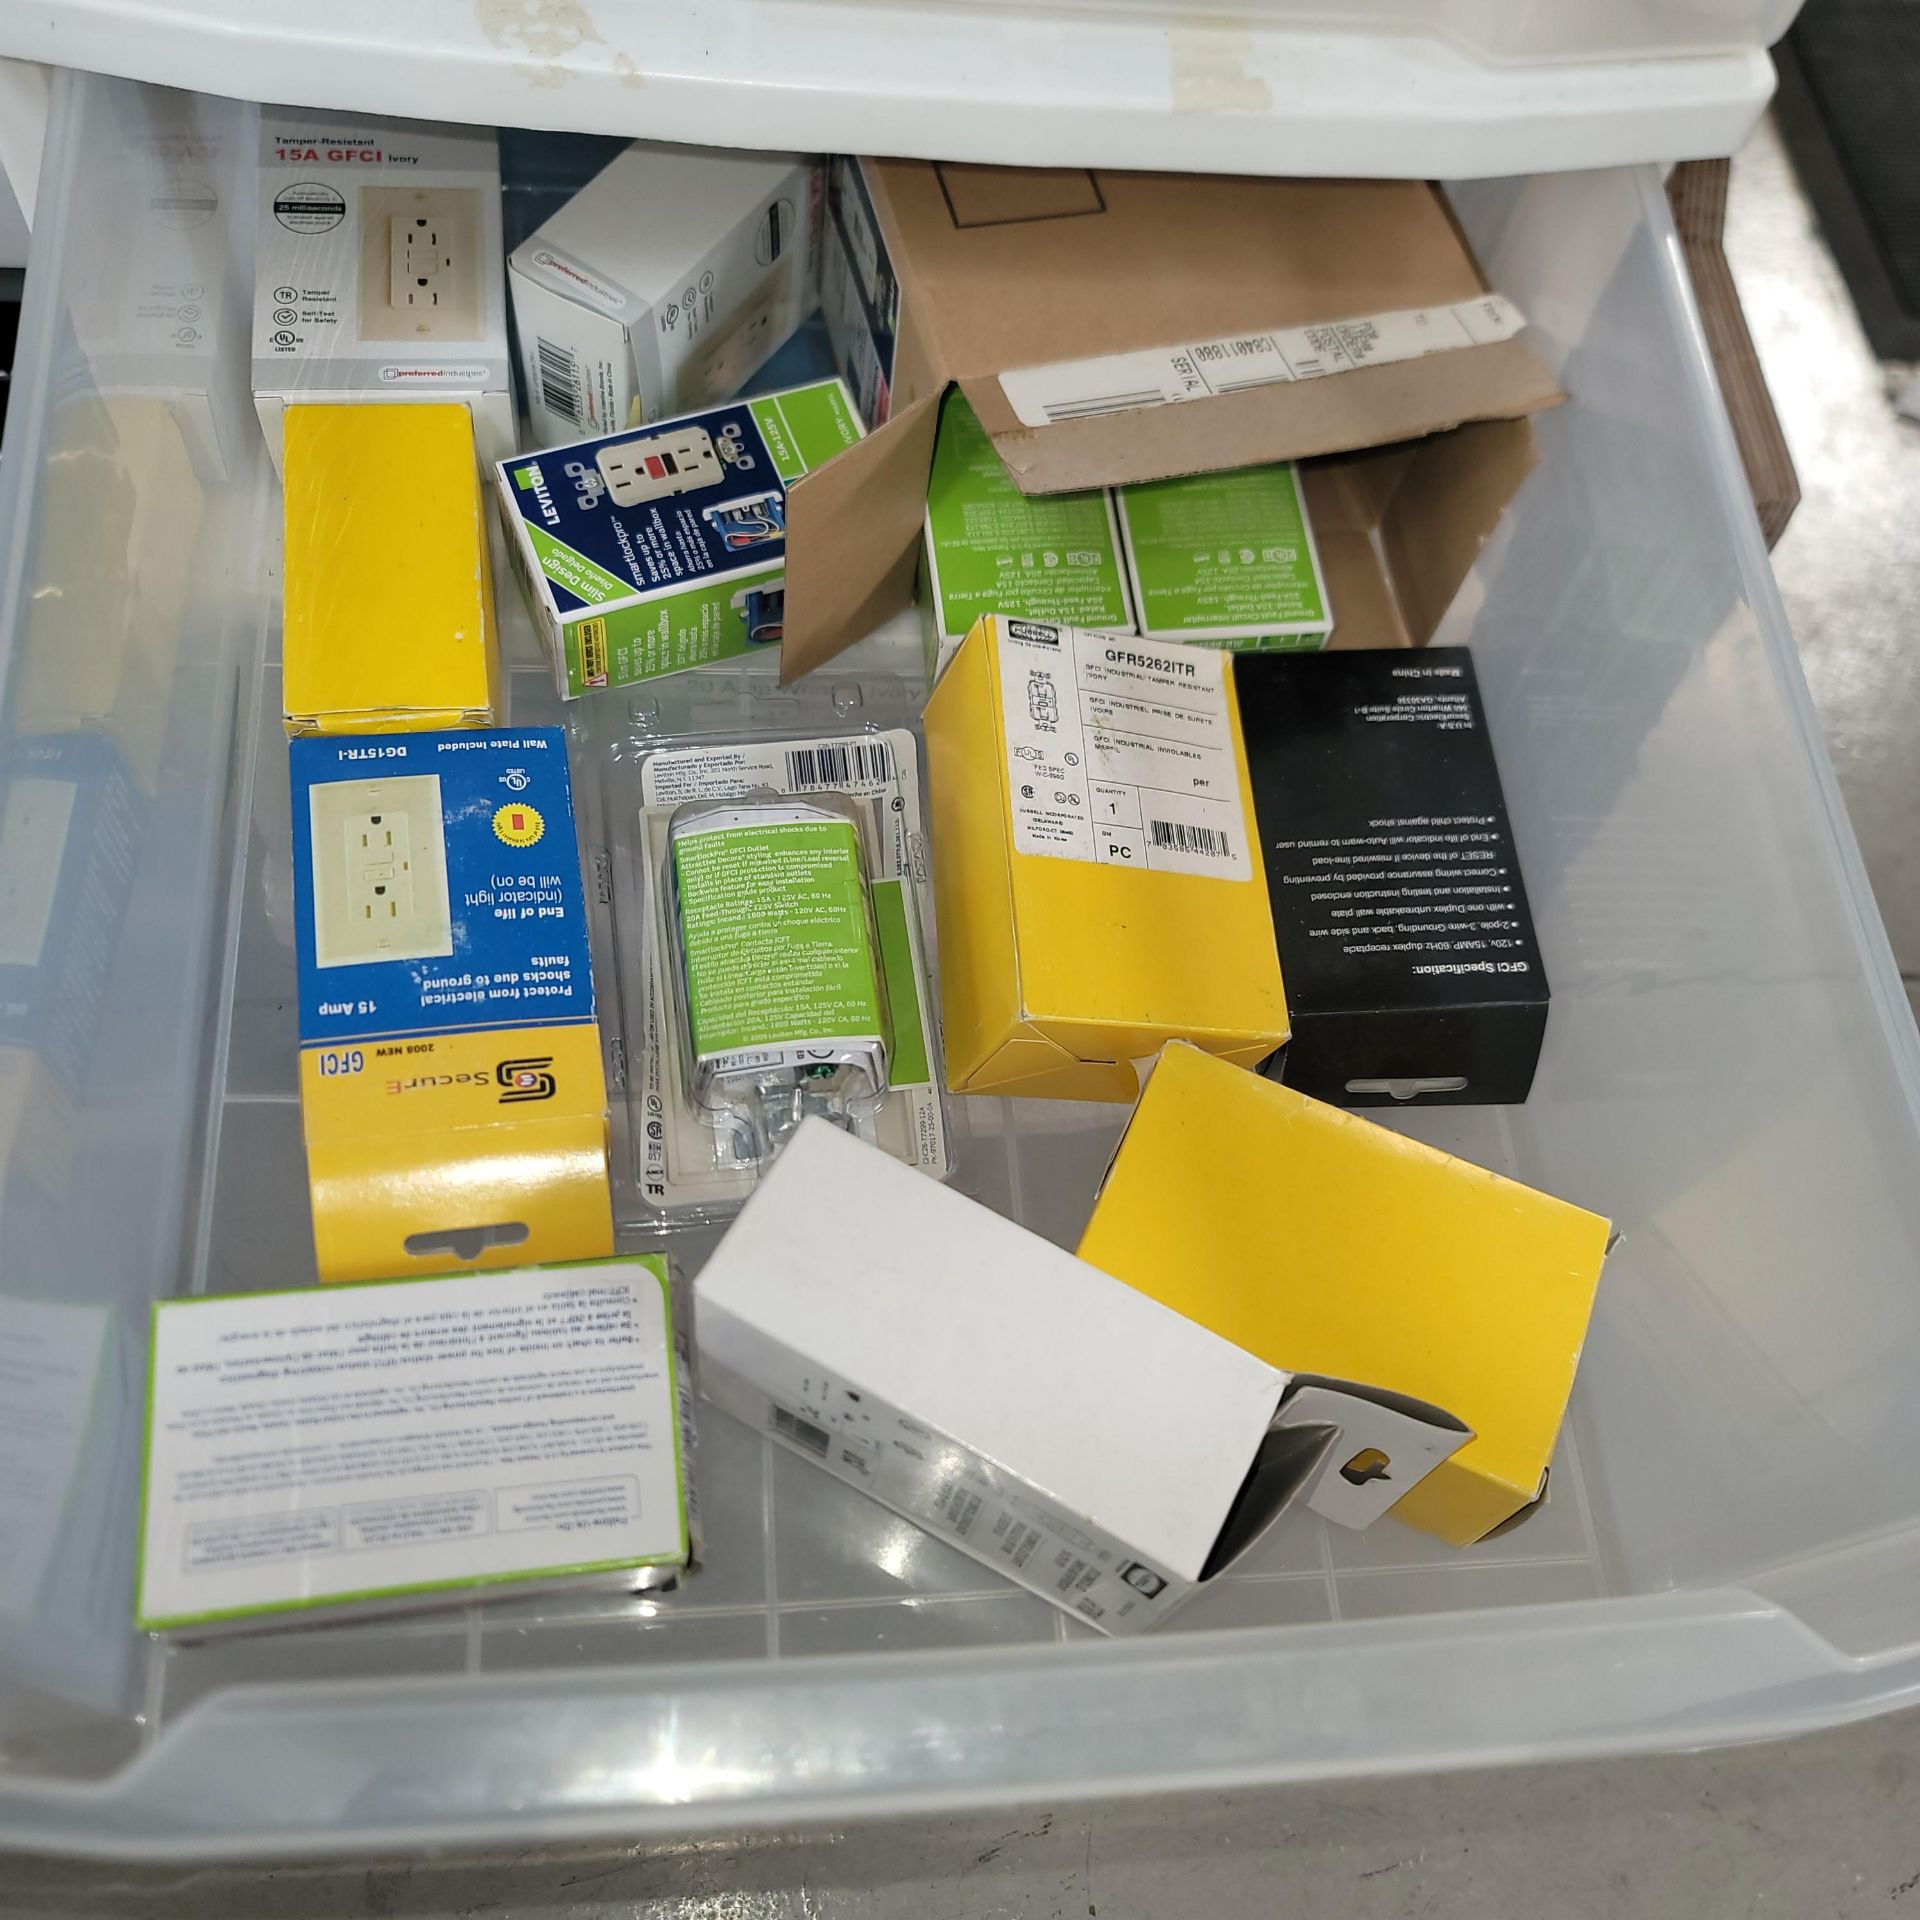 LOT - PORTABLE PLASTIC 4-DRAWER STORAGE CART, W/ CONTENTS OF GCFI RECEPTACLES - Image 3 of 6